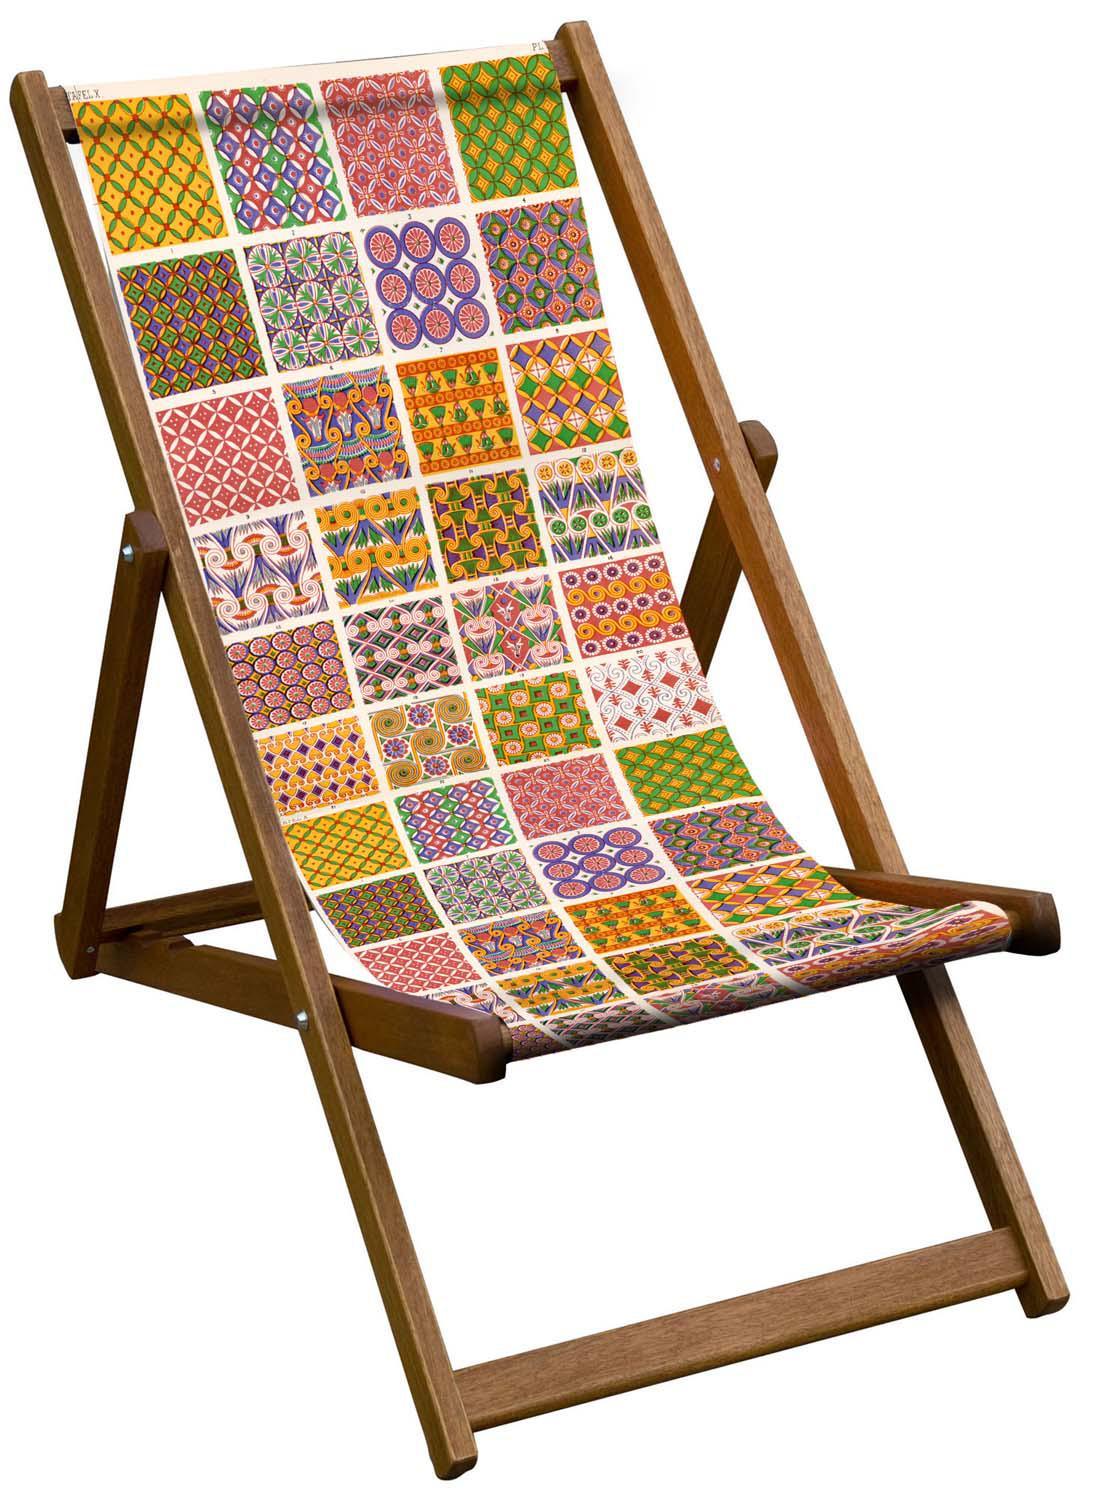 Egyptian VII Deckchairs - Deck Chairs & Outdoor Chairs